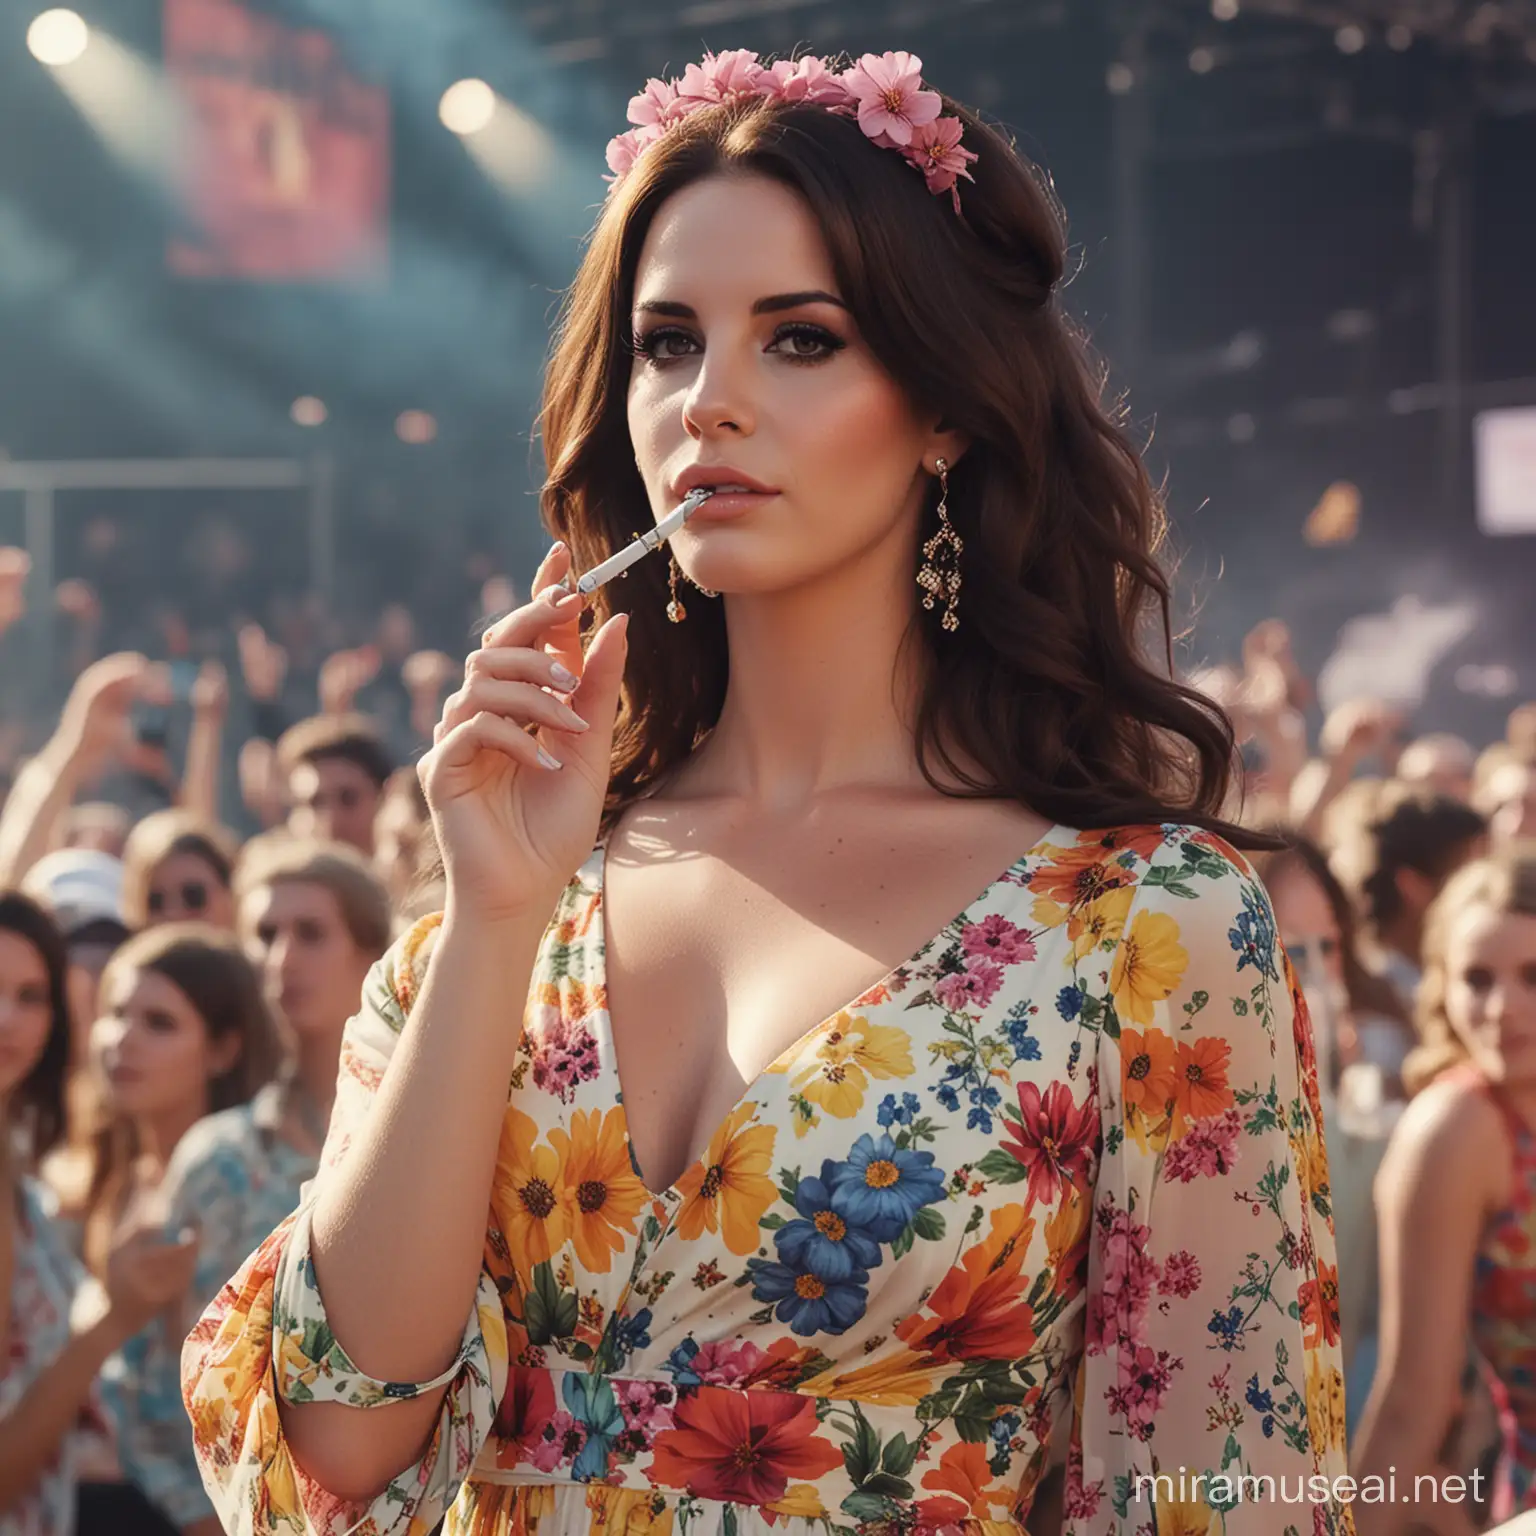 Lana Del Rey on Festival Stage in Colorful Floral Dress with Smokey Eyeliner